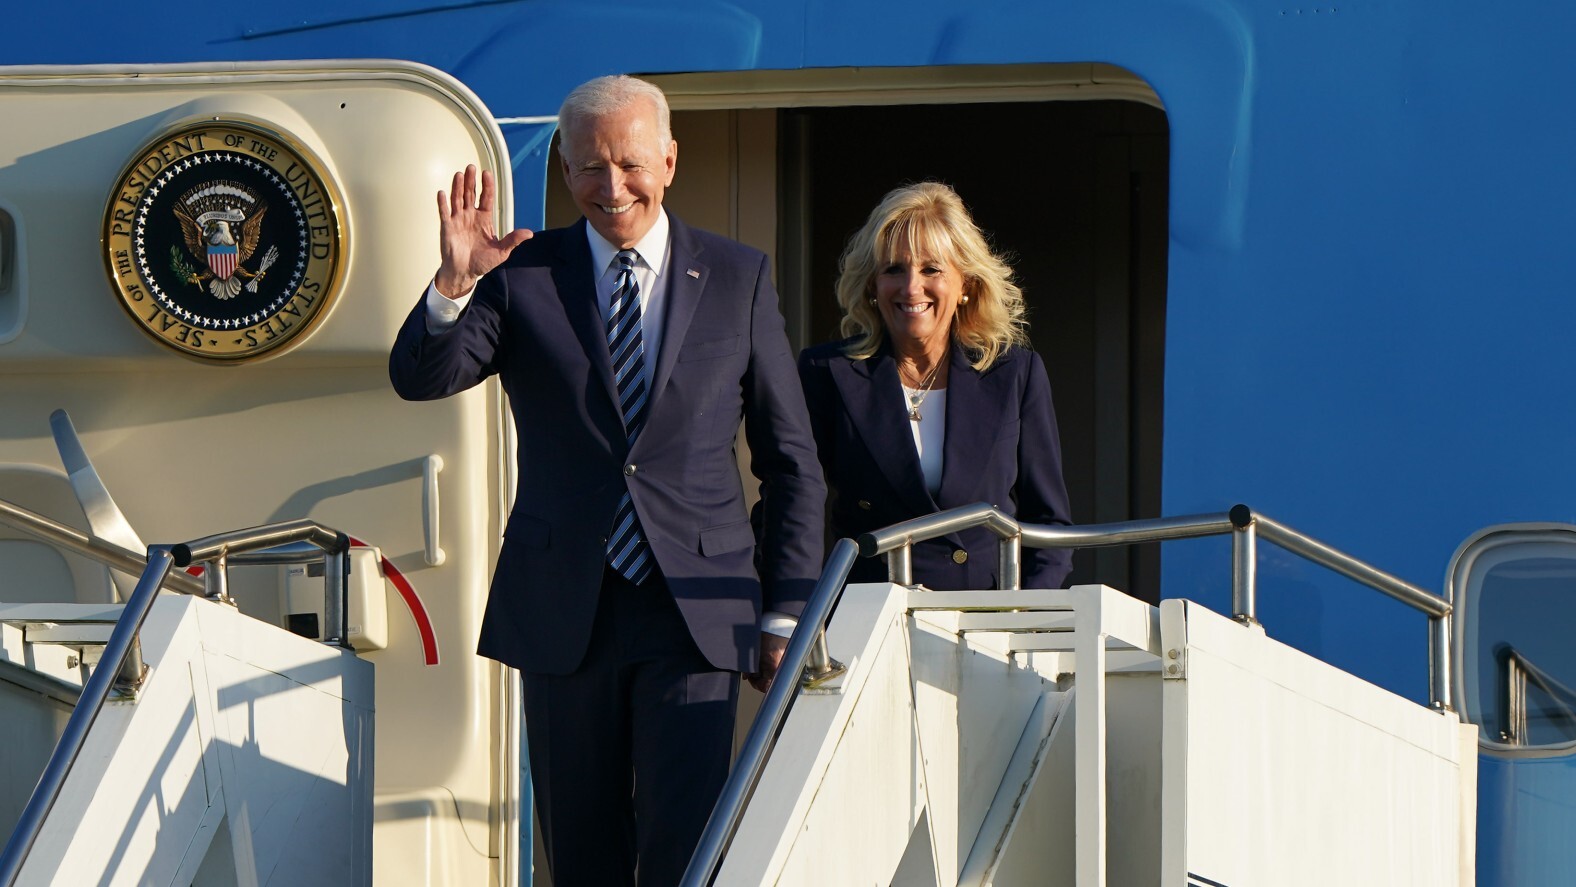 Joe and Jill Biden exit on Air Force One after flying into RAF Mildenhall in Suffolk 